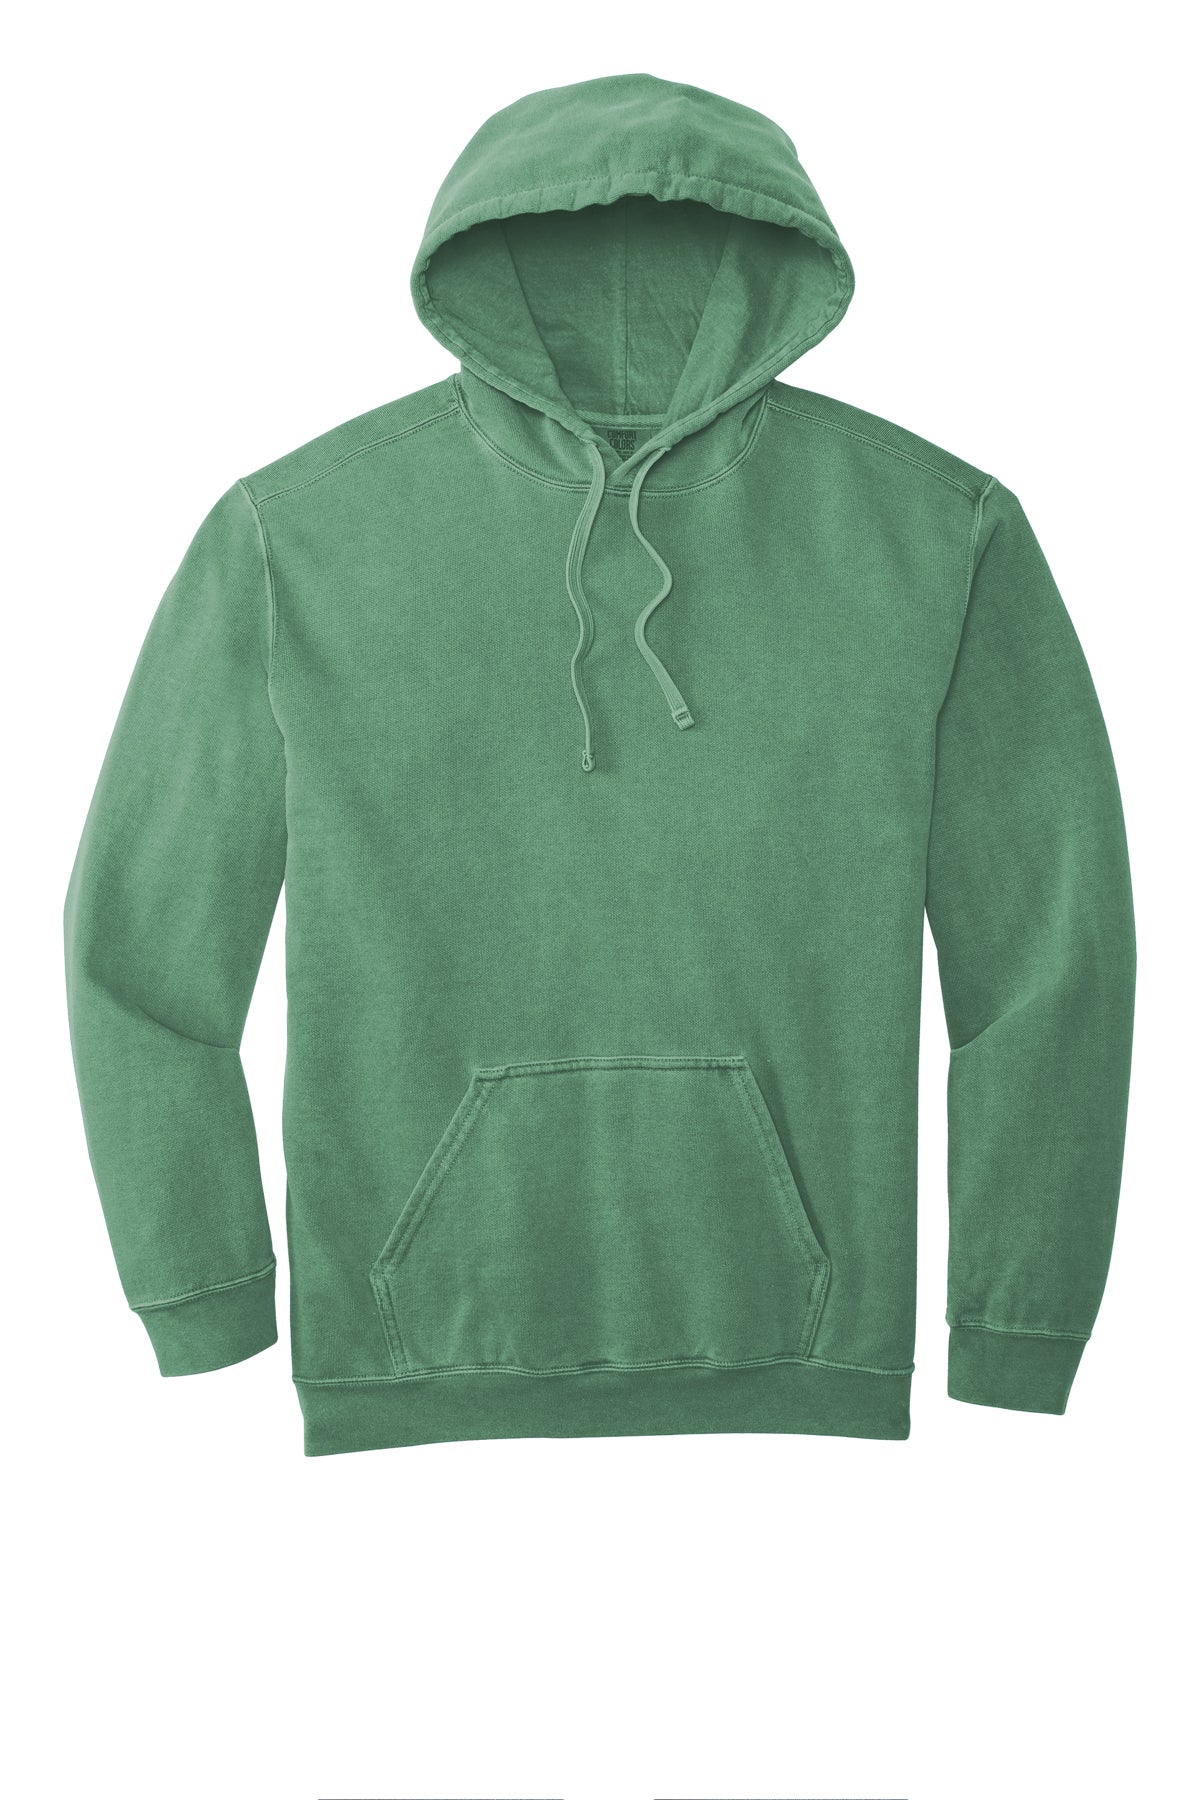 Comfort Colors Garment-Dyed Hoodie (1567) in Light Green